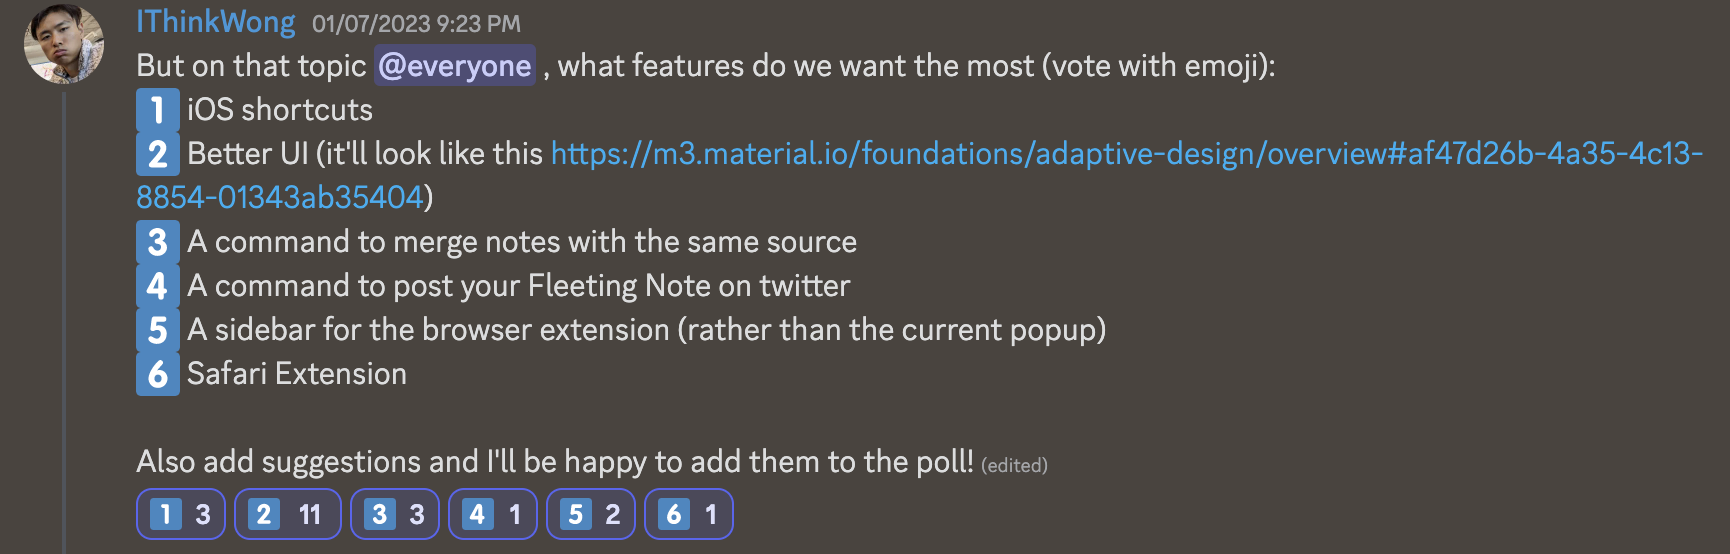 feature-poll-2.png